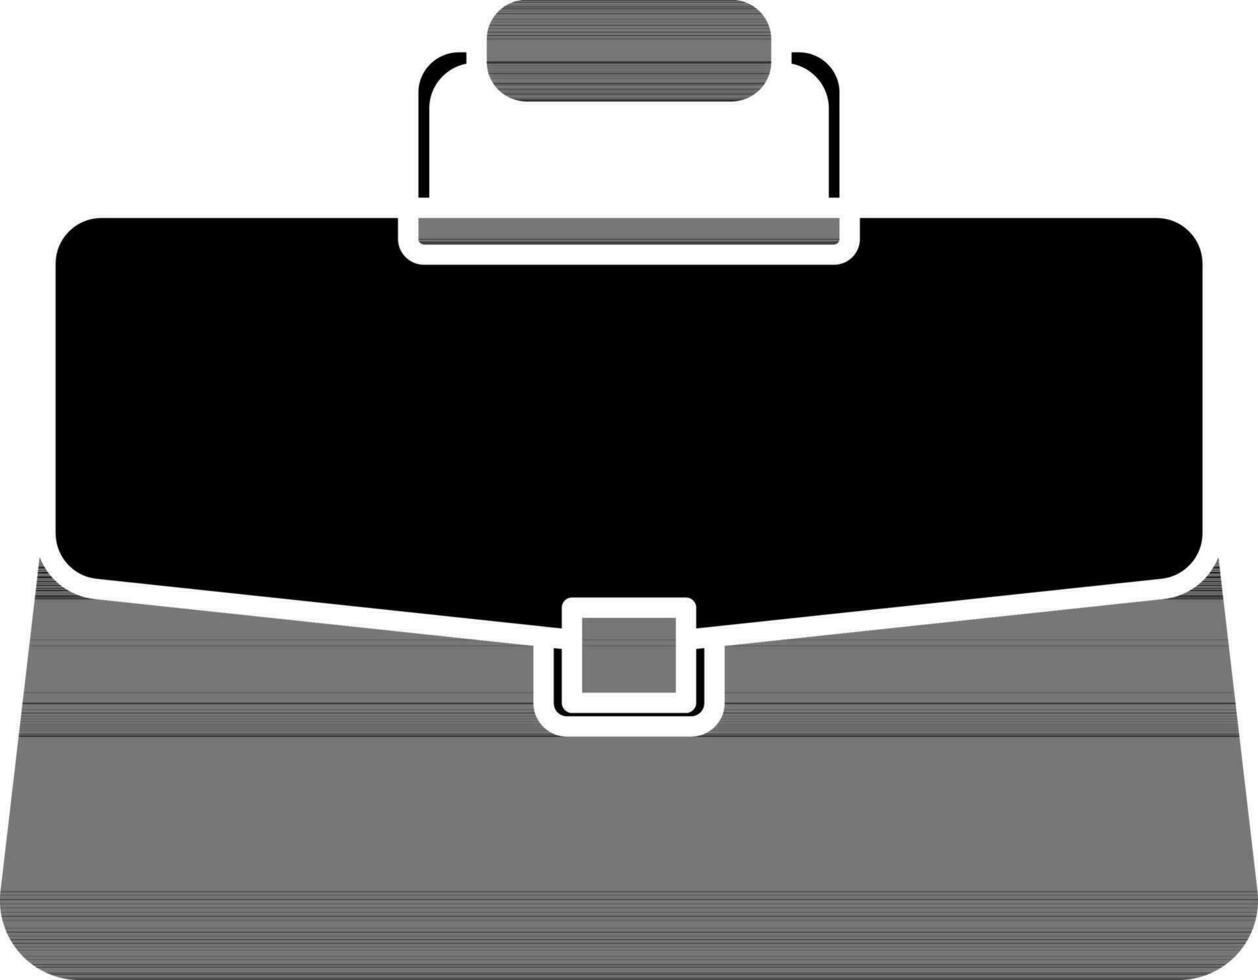 Briefcase Icon In black and white Color. vector